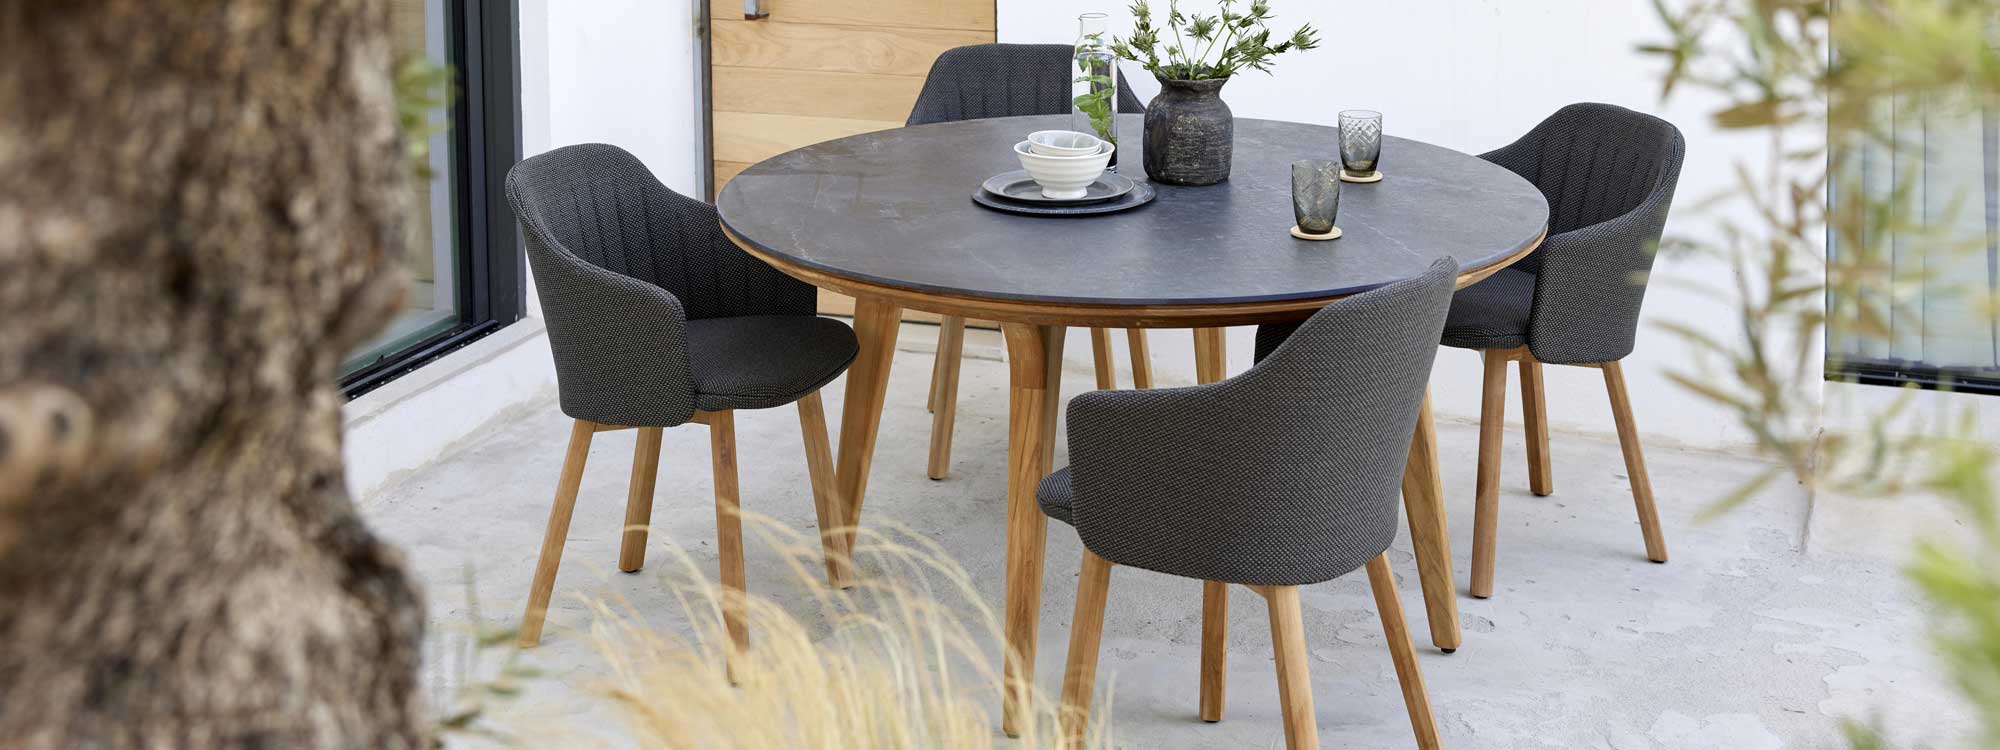 Image of Aspect round teak table with Black Volcano ceramic & Choice teak chairs with dark-grey seat and back upholstery by Cane-line